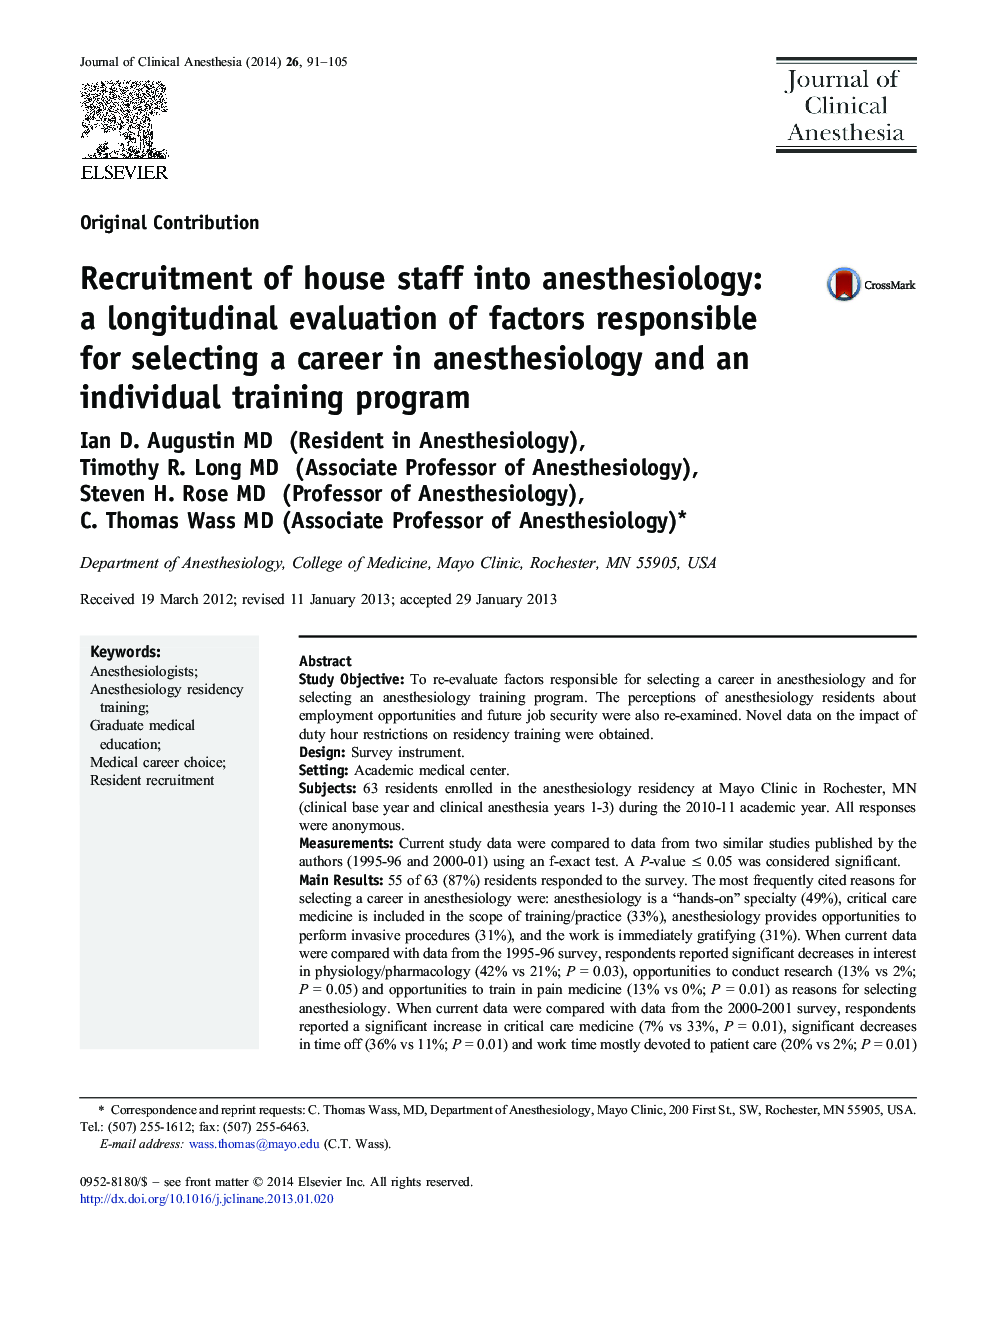 Recruitment of house staff into anesthesiology: a longitudinal evaluation of factors responsible for selecting a career in anesthesiology and an individual training program